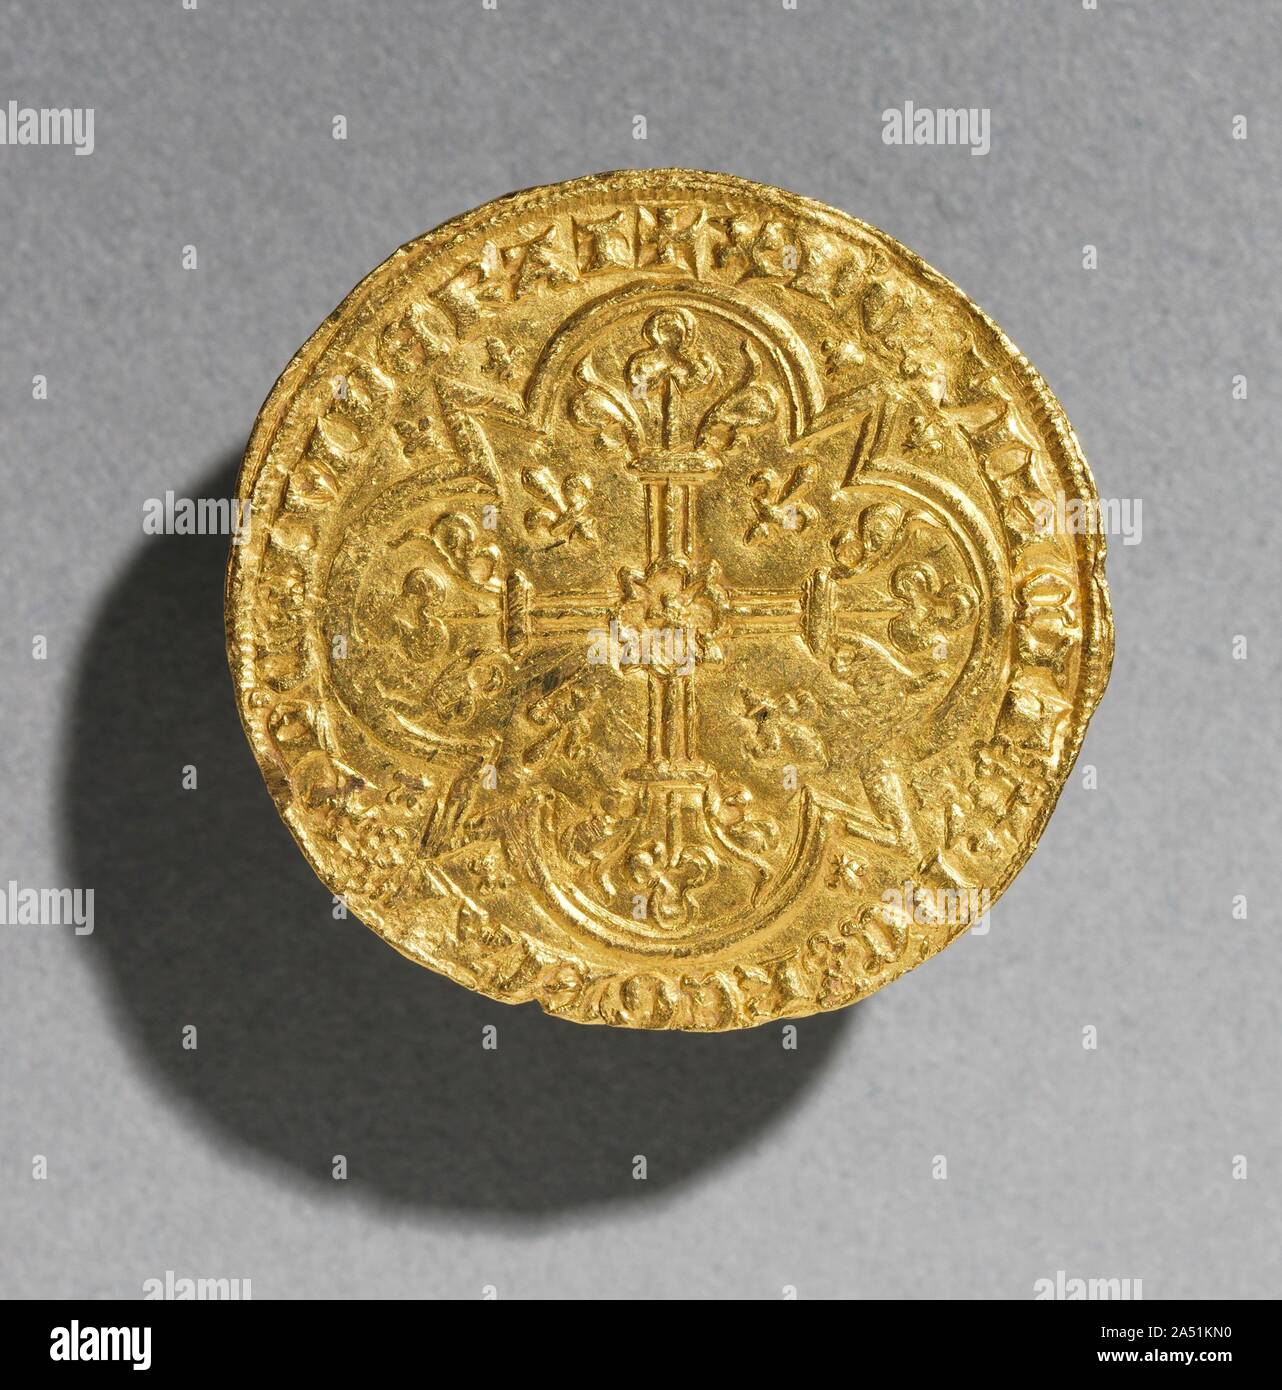 Mouton dOr of King Jean le Bon of France, 1350-1364 (reverse), 1350-1364. Because this gold coin represents the Paschal Lamb, a symbol of Christ, on one of its faces, it is known as a &quot;Golden Sheep&quot;--Mouton dOr in French. Stock Photo